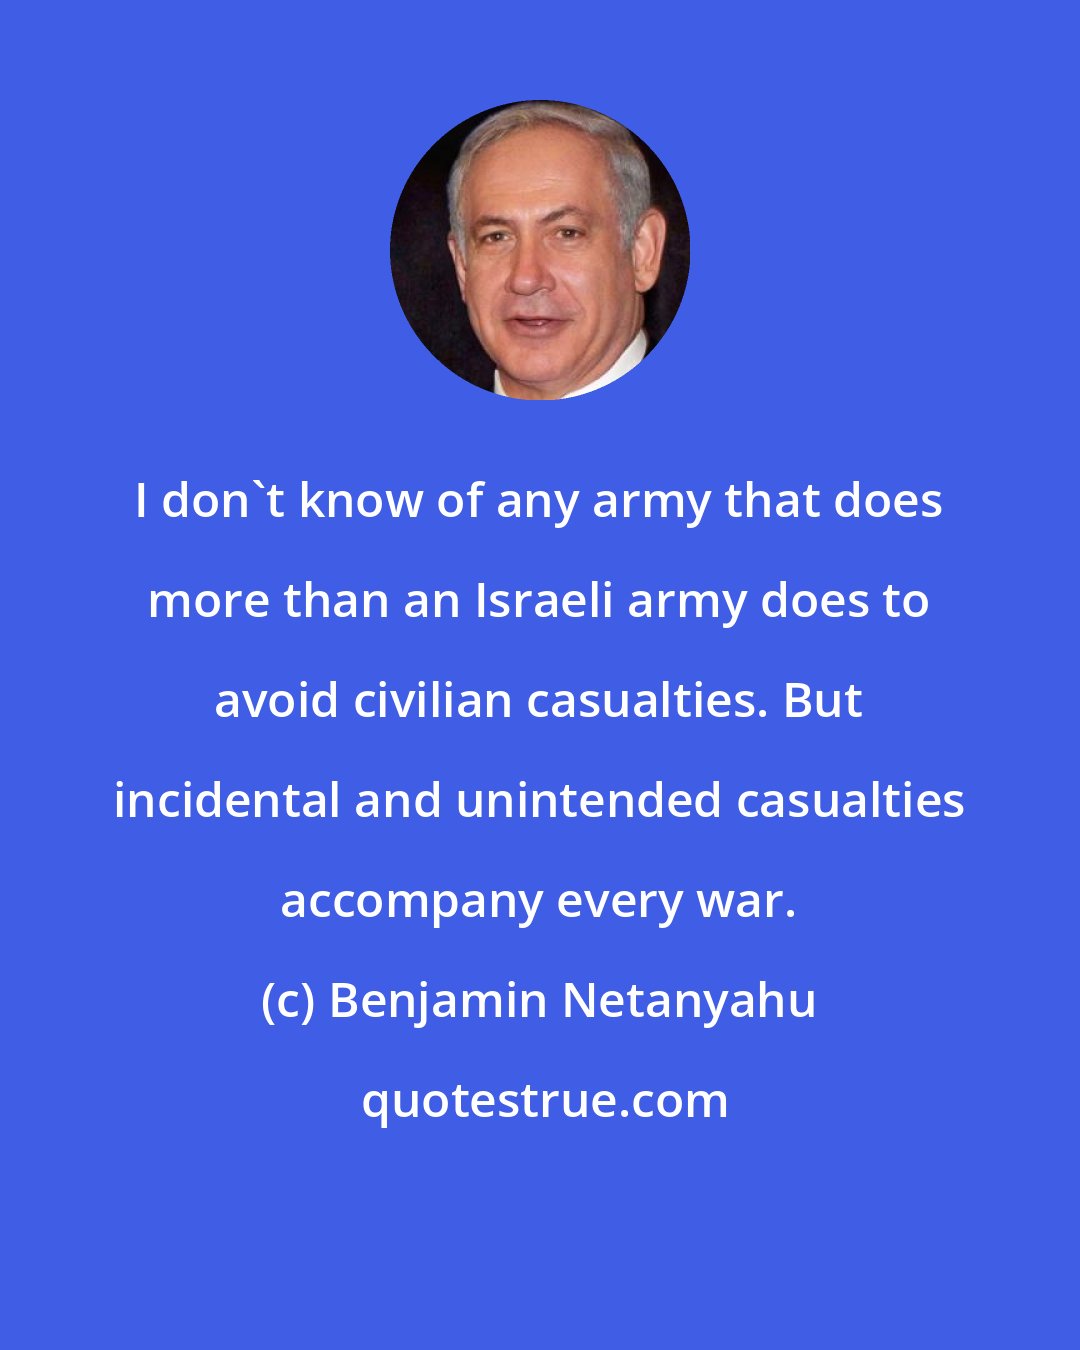 Benjamin Netanyahu: I don't know of any army that does more than an Israeli army does to avoid civilian casualties. But incidental and unintended casualties accompany every war.